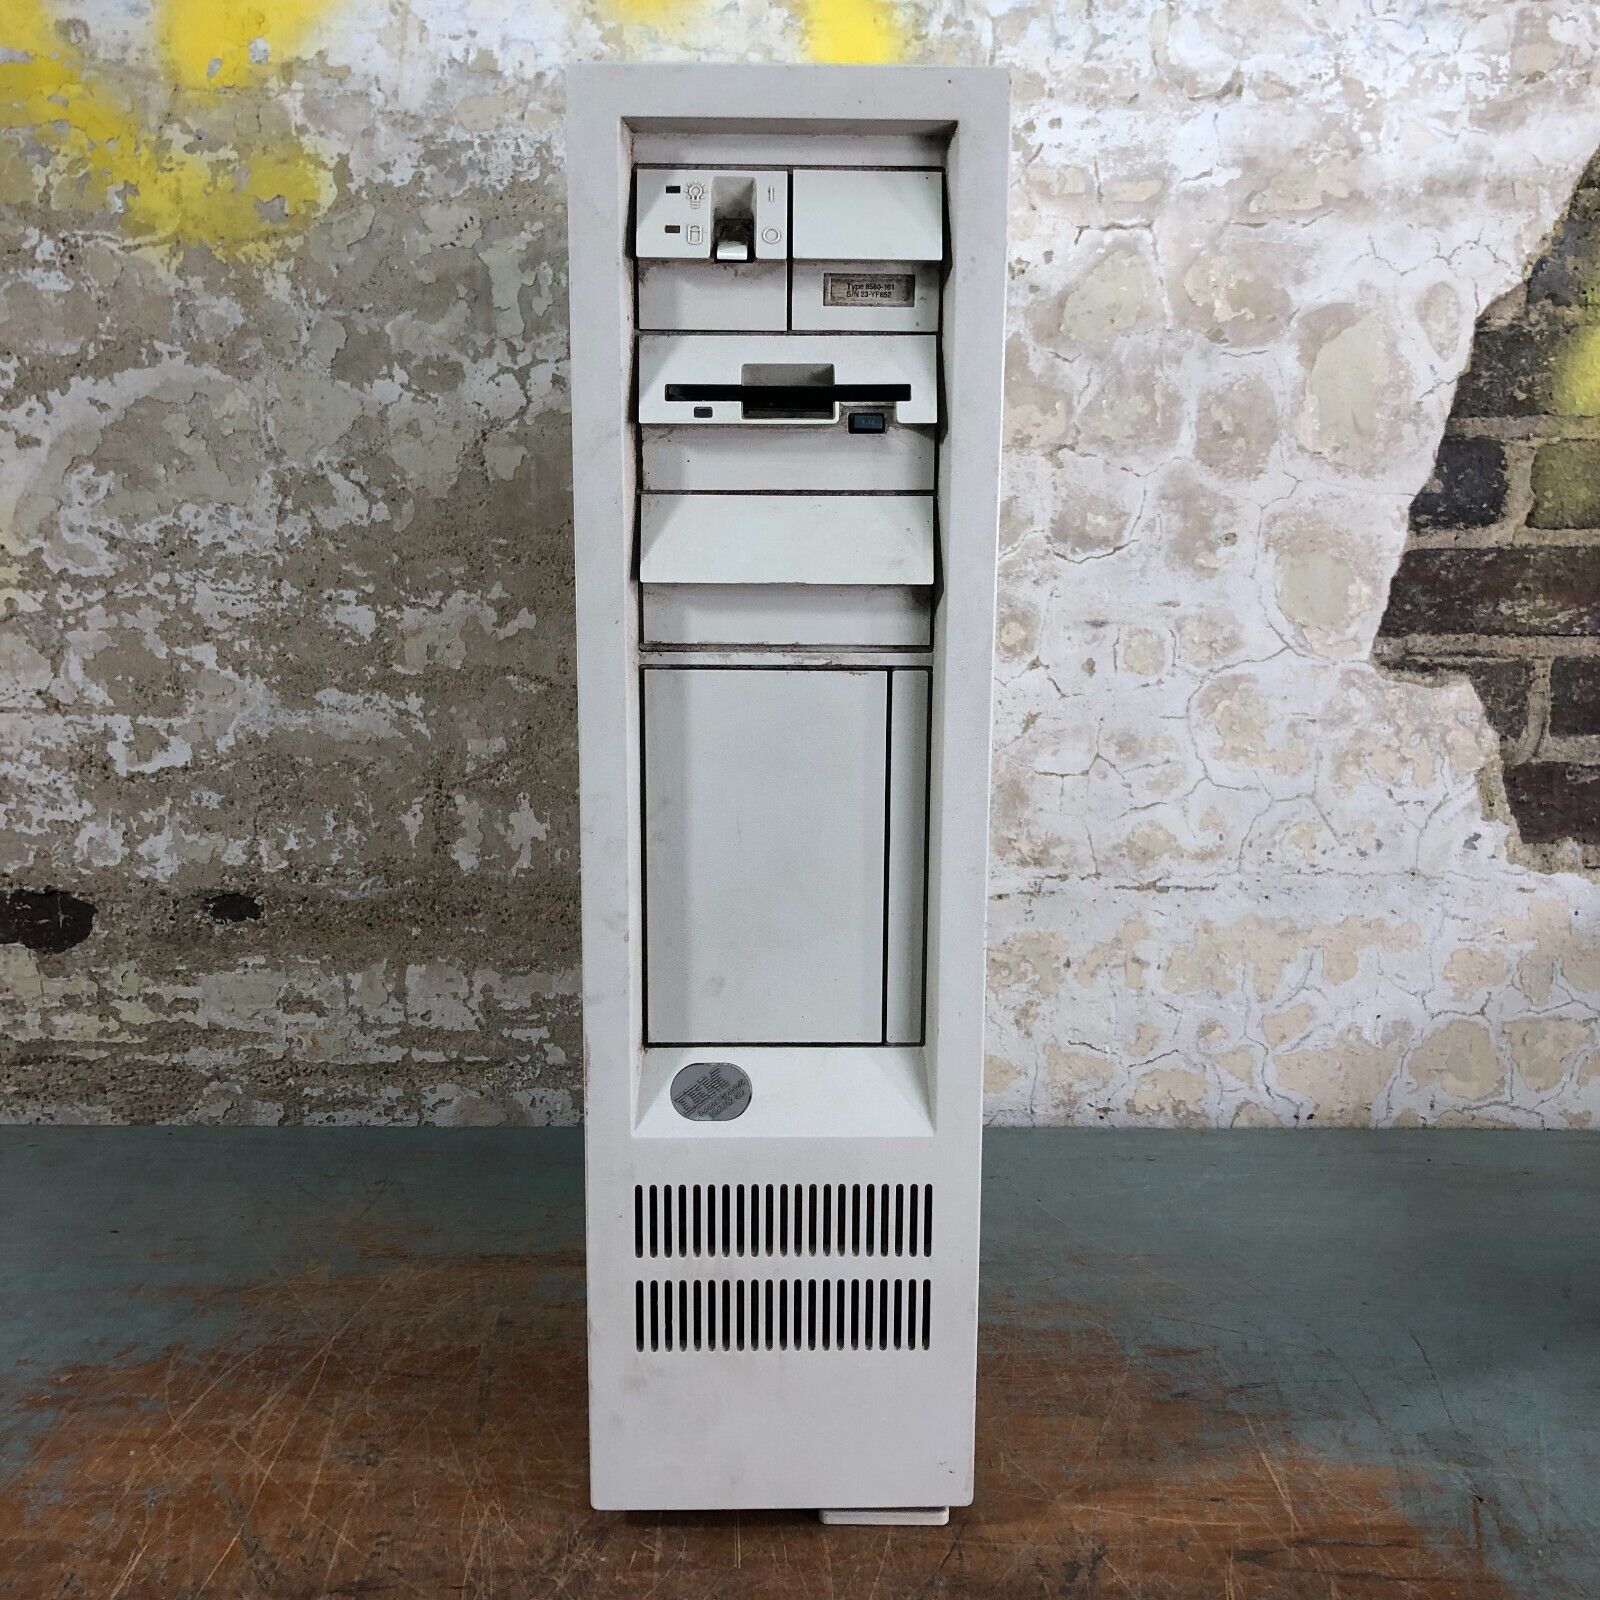 IBM PS/2 Model 80 386 Type 8580 Personal System 2 Tower PC Computer POWERS ON